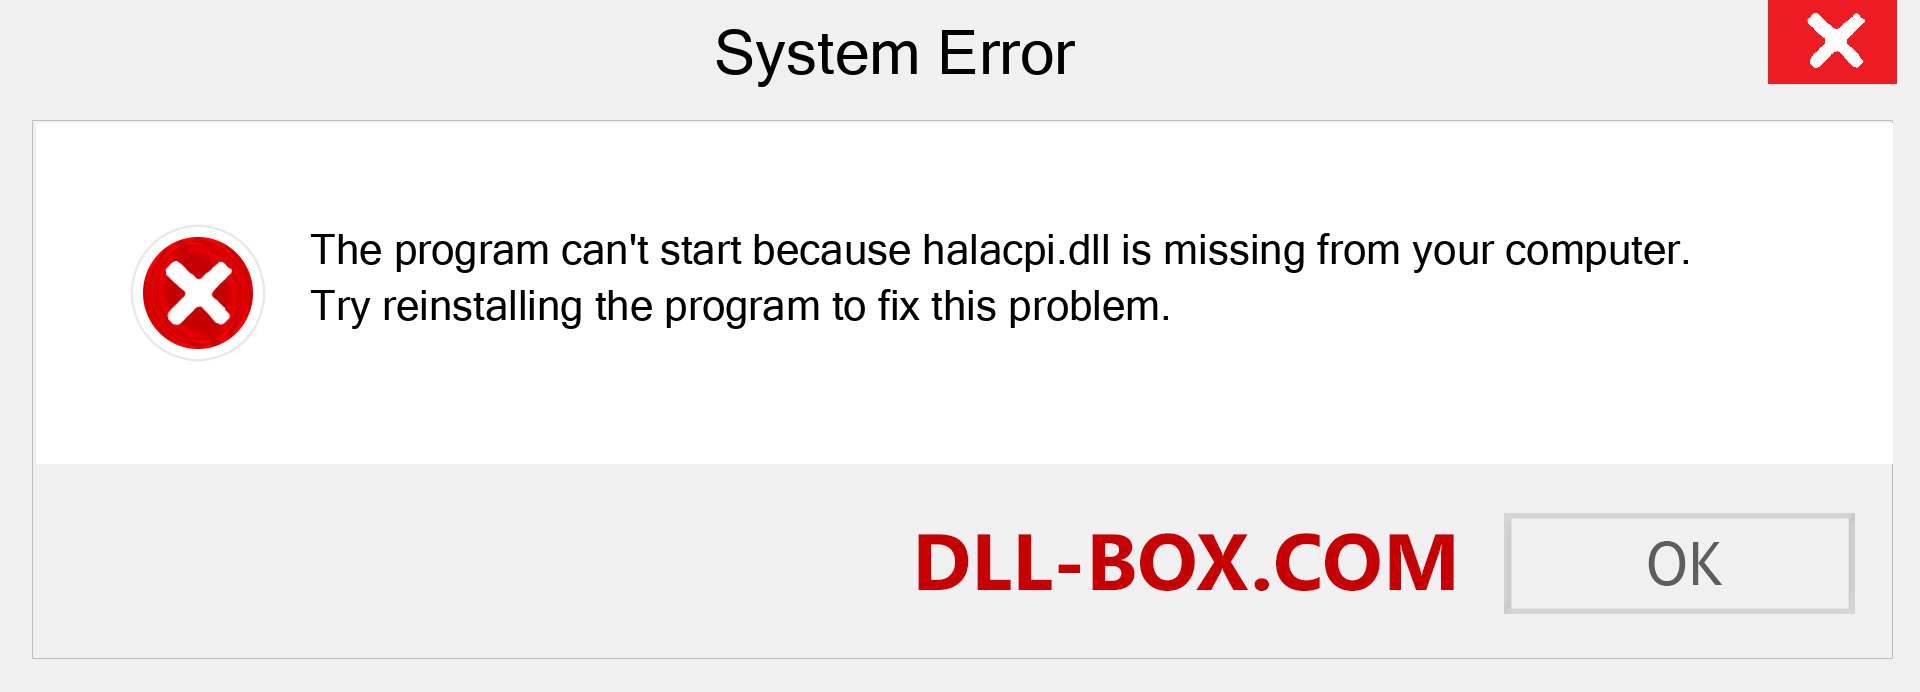  halacpi.dll file is missing?. Download for Windows 7, 8, 10 - Fix  halacpi dll Missing Error on Windows, photos, images